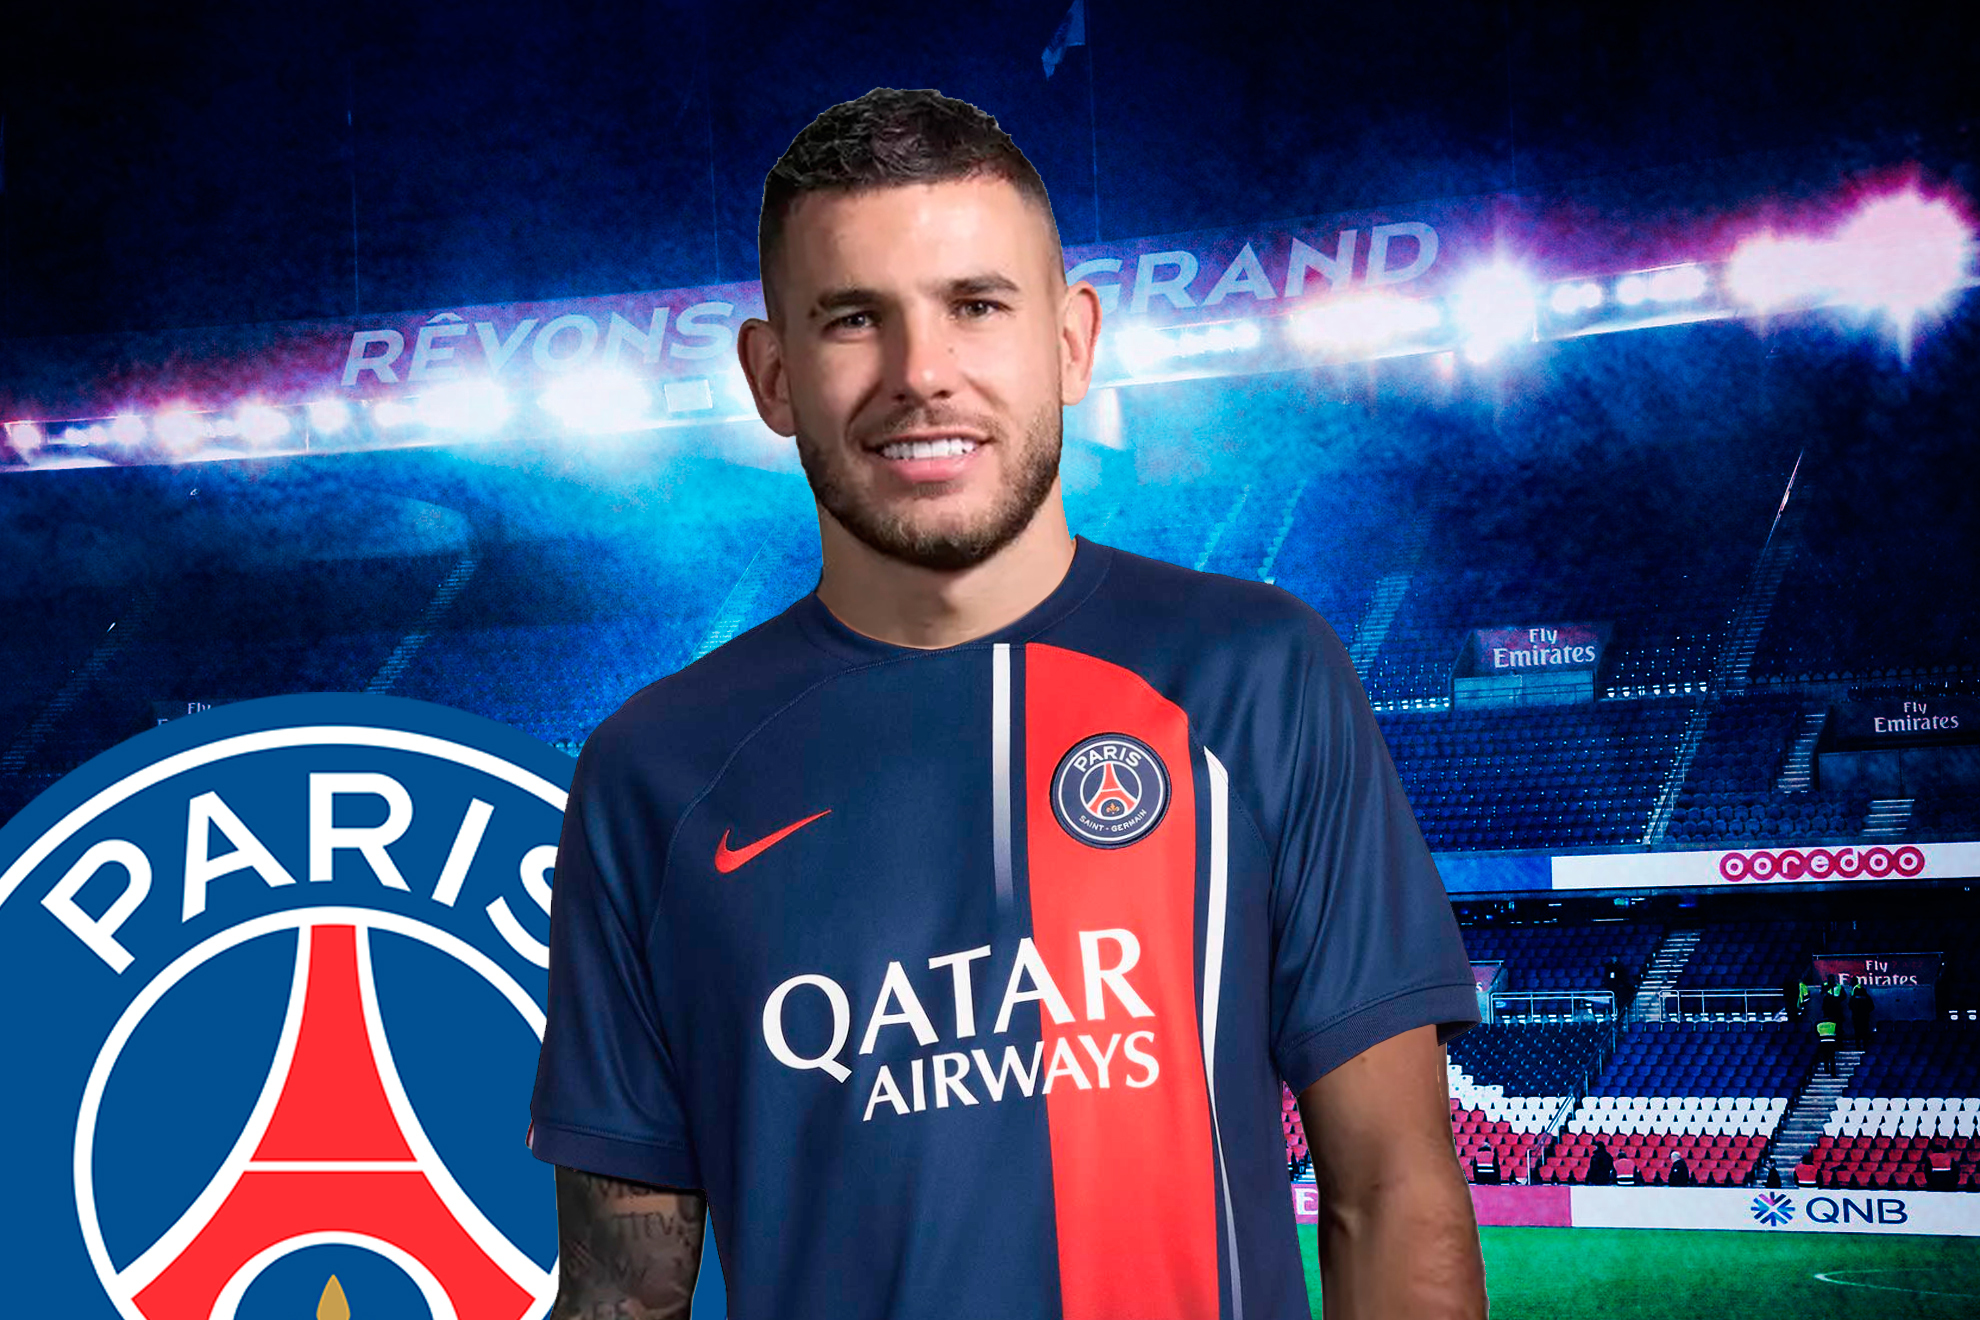 Luis Enrique already has Lucas Hernandez at PSG and begins work awaiting Neymar and Mbappe